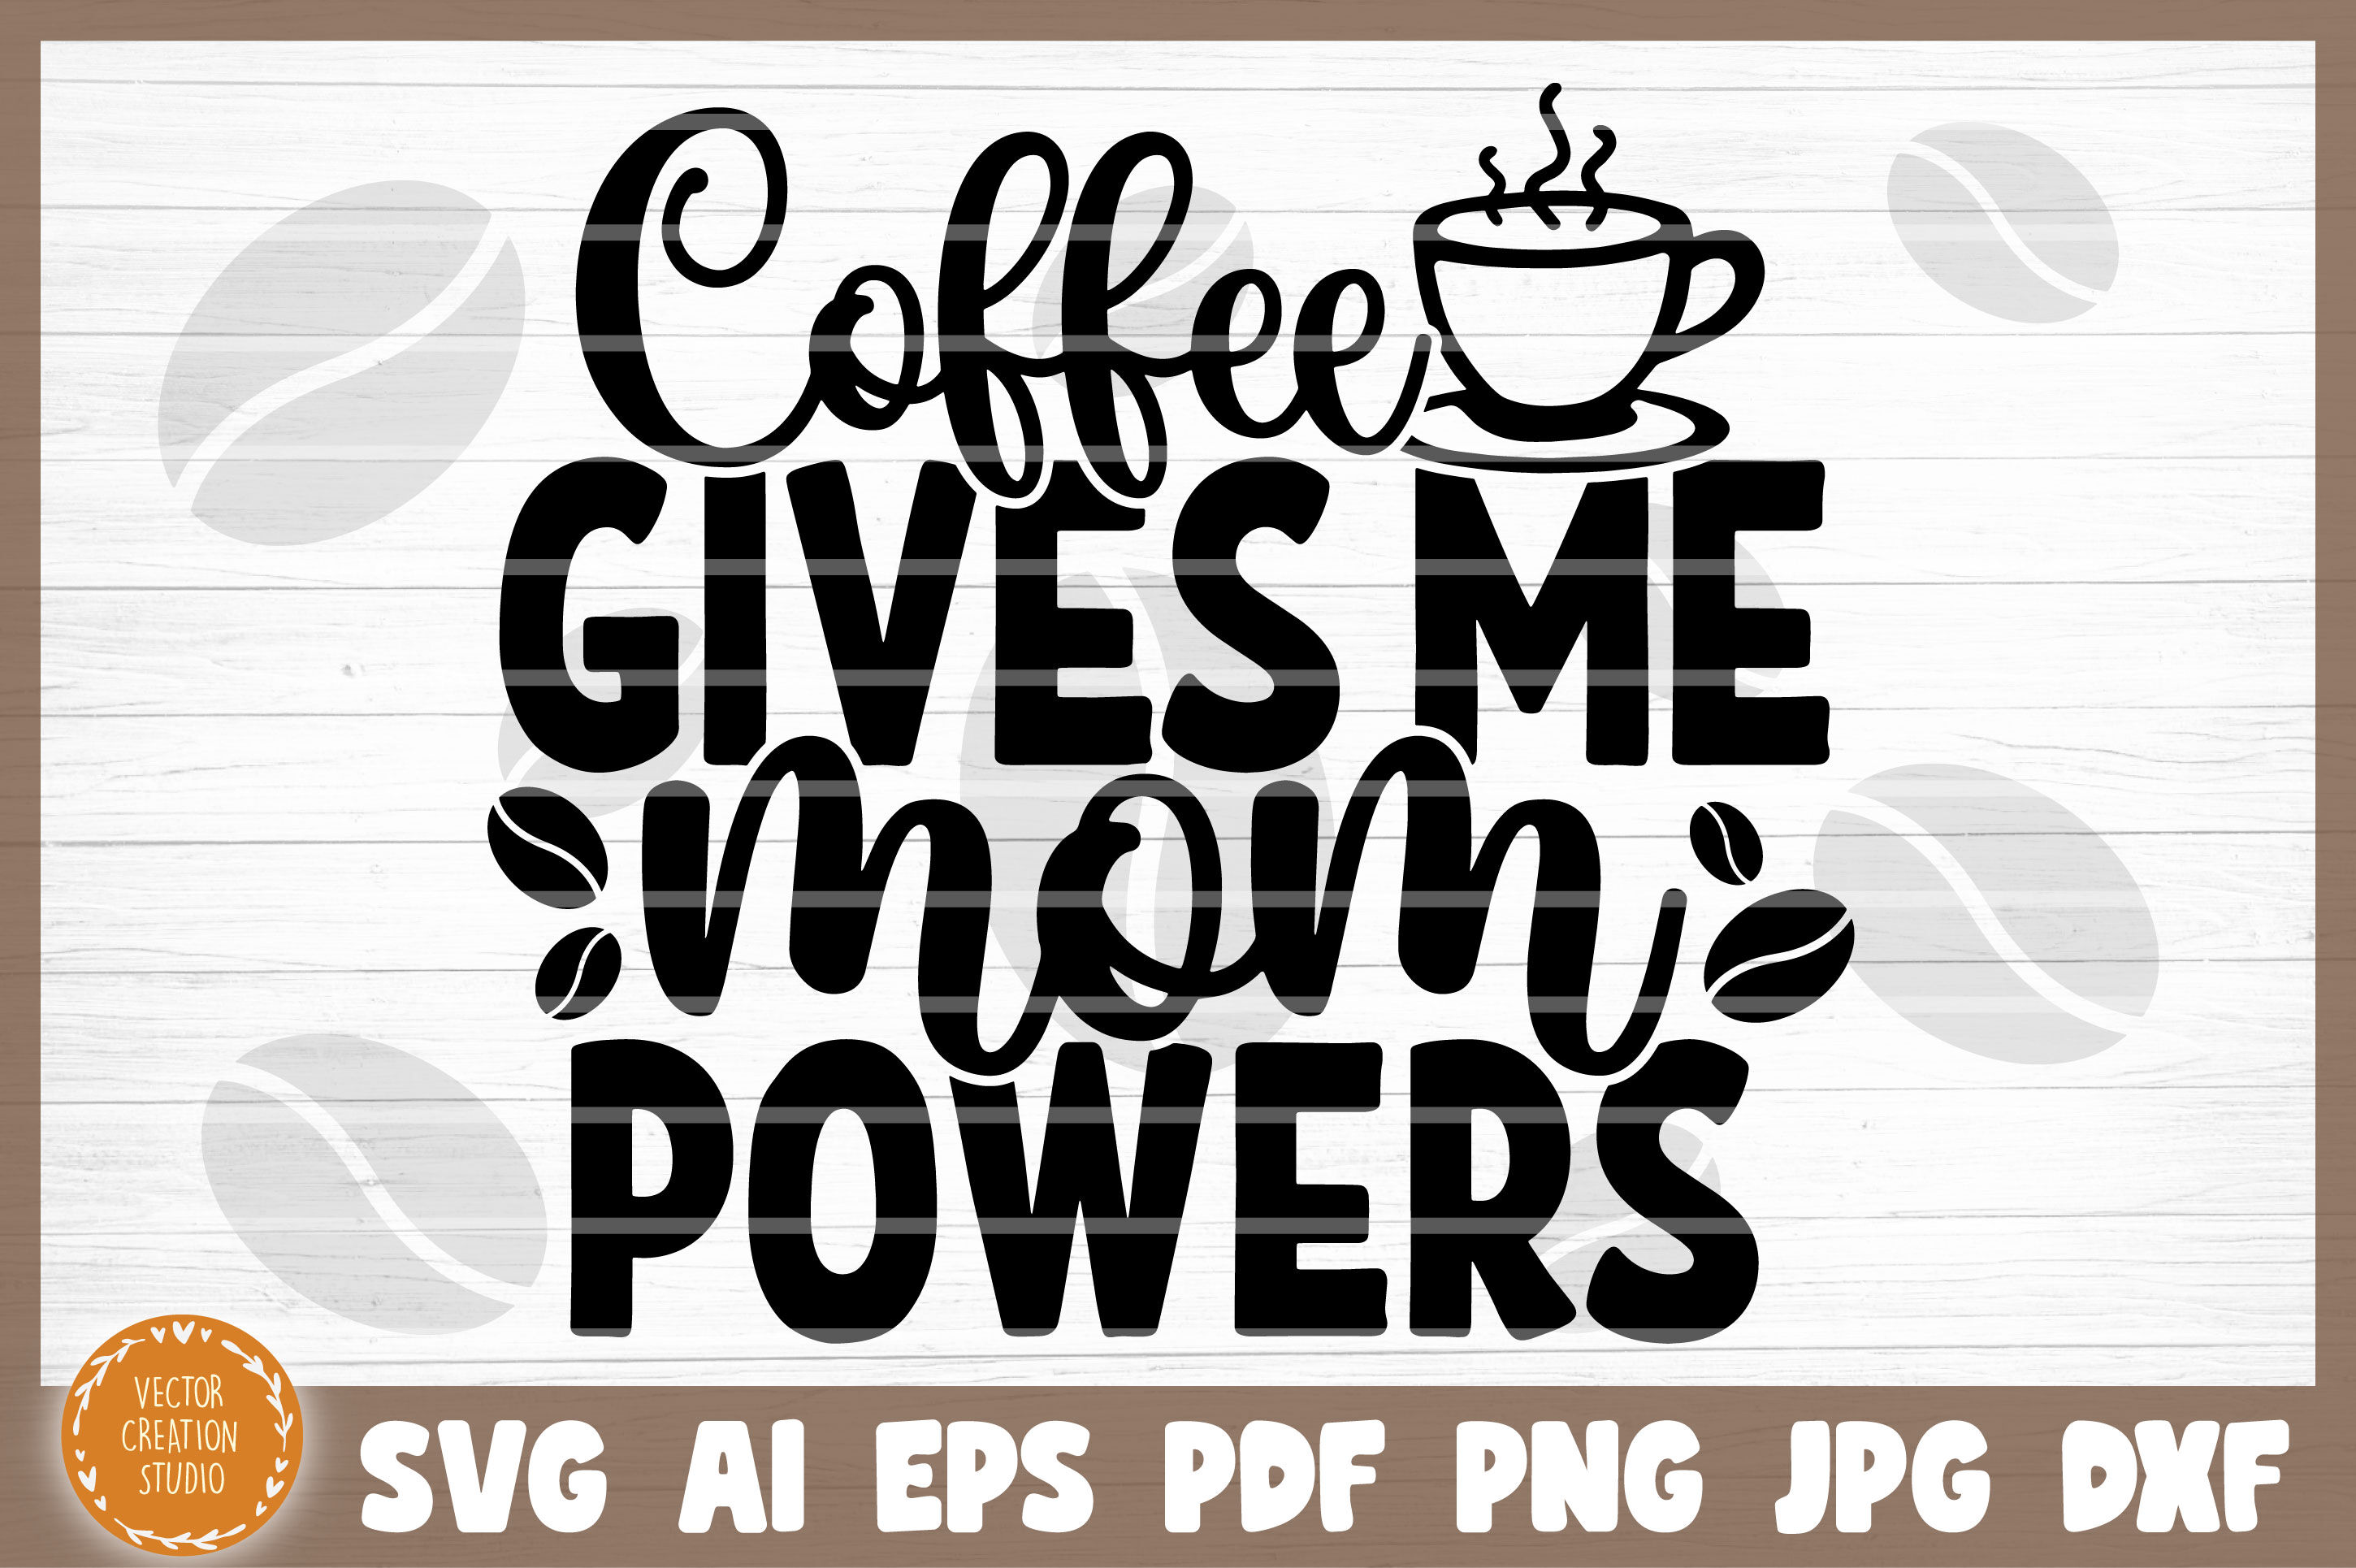 Silhouette File Mom Svg Png Download Mom Designs Mom Shirt Svg Coffee Gives Me Mom Powers Svg Dxf Funny Svg Cricut File Scrapbooking Papercraft